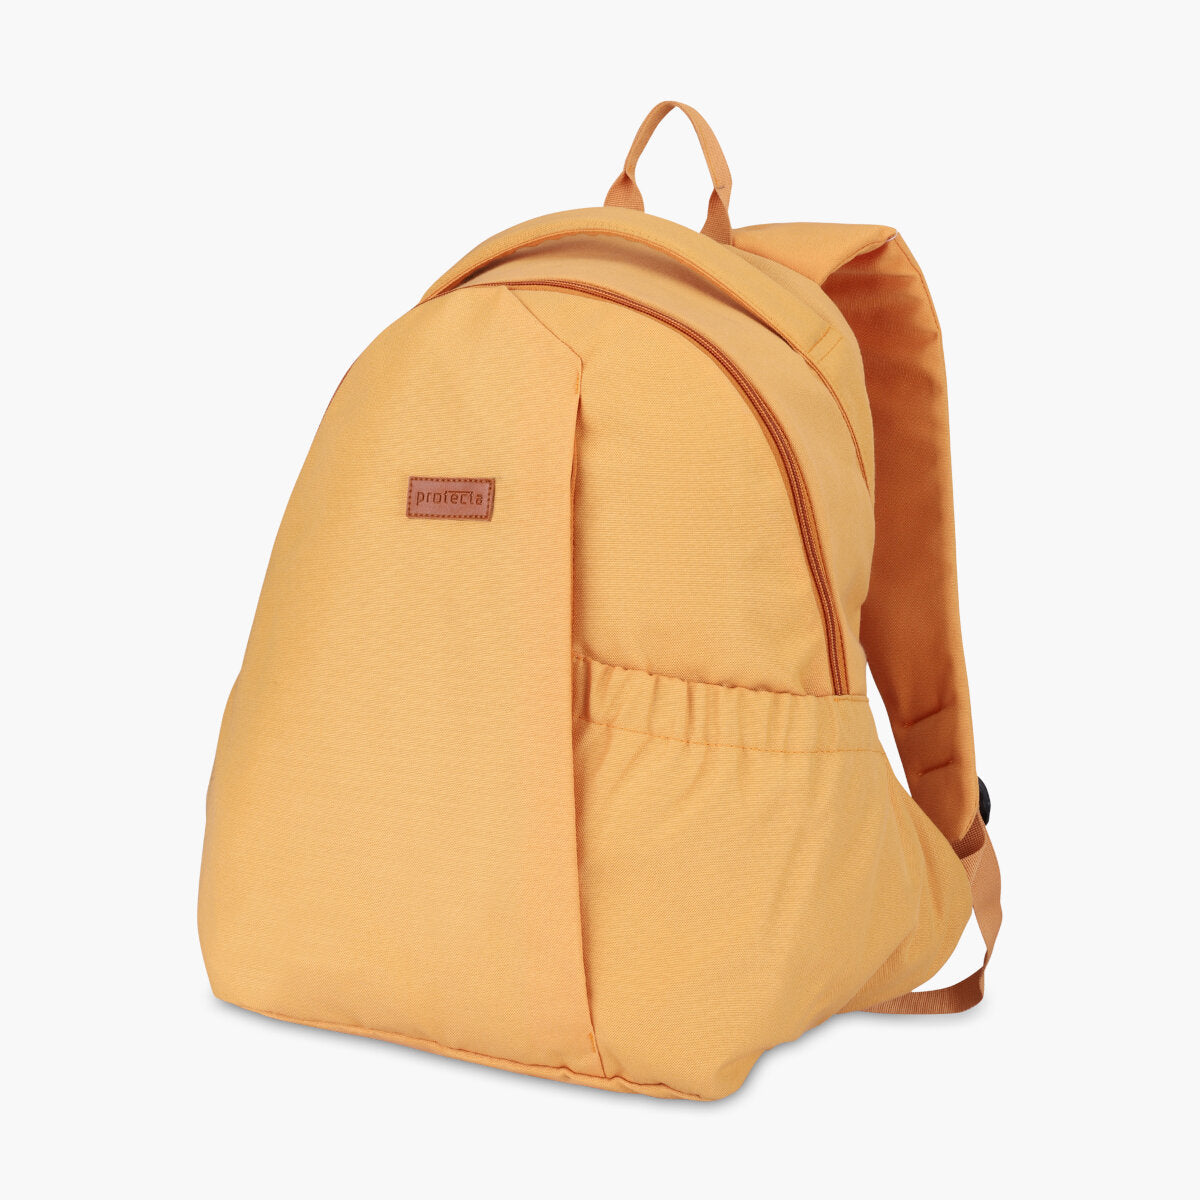 Yellow | Protecta Tactical Turn Laptop Backpack - 2